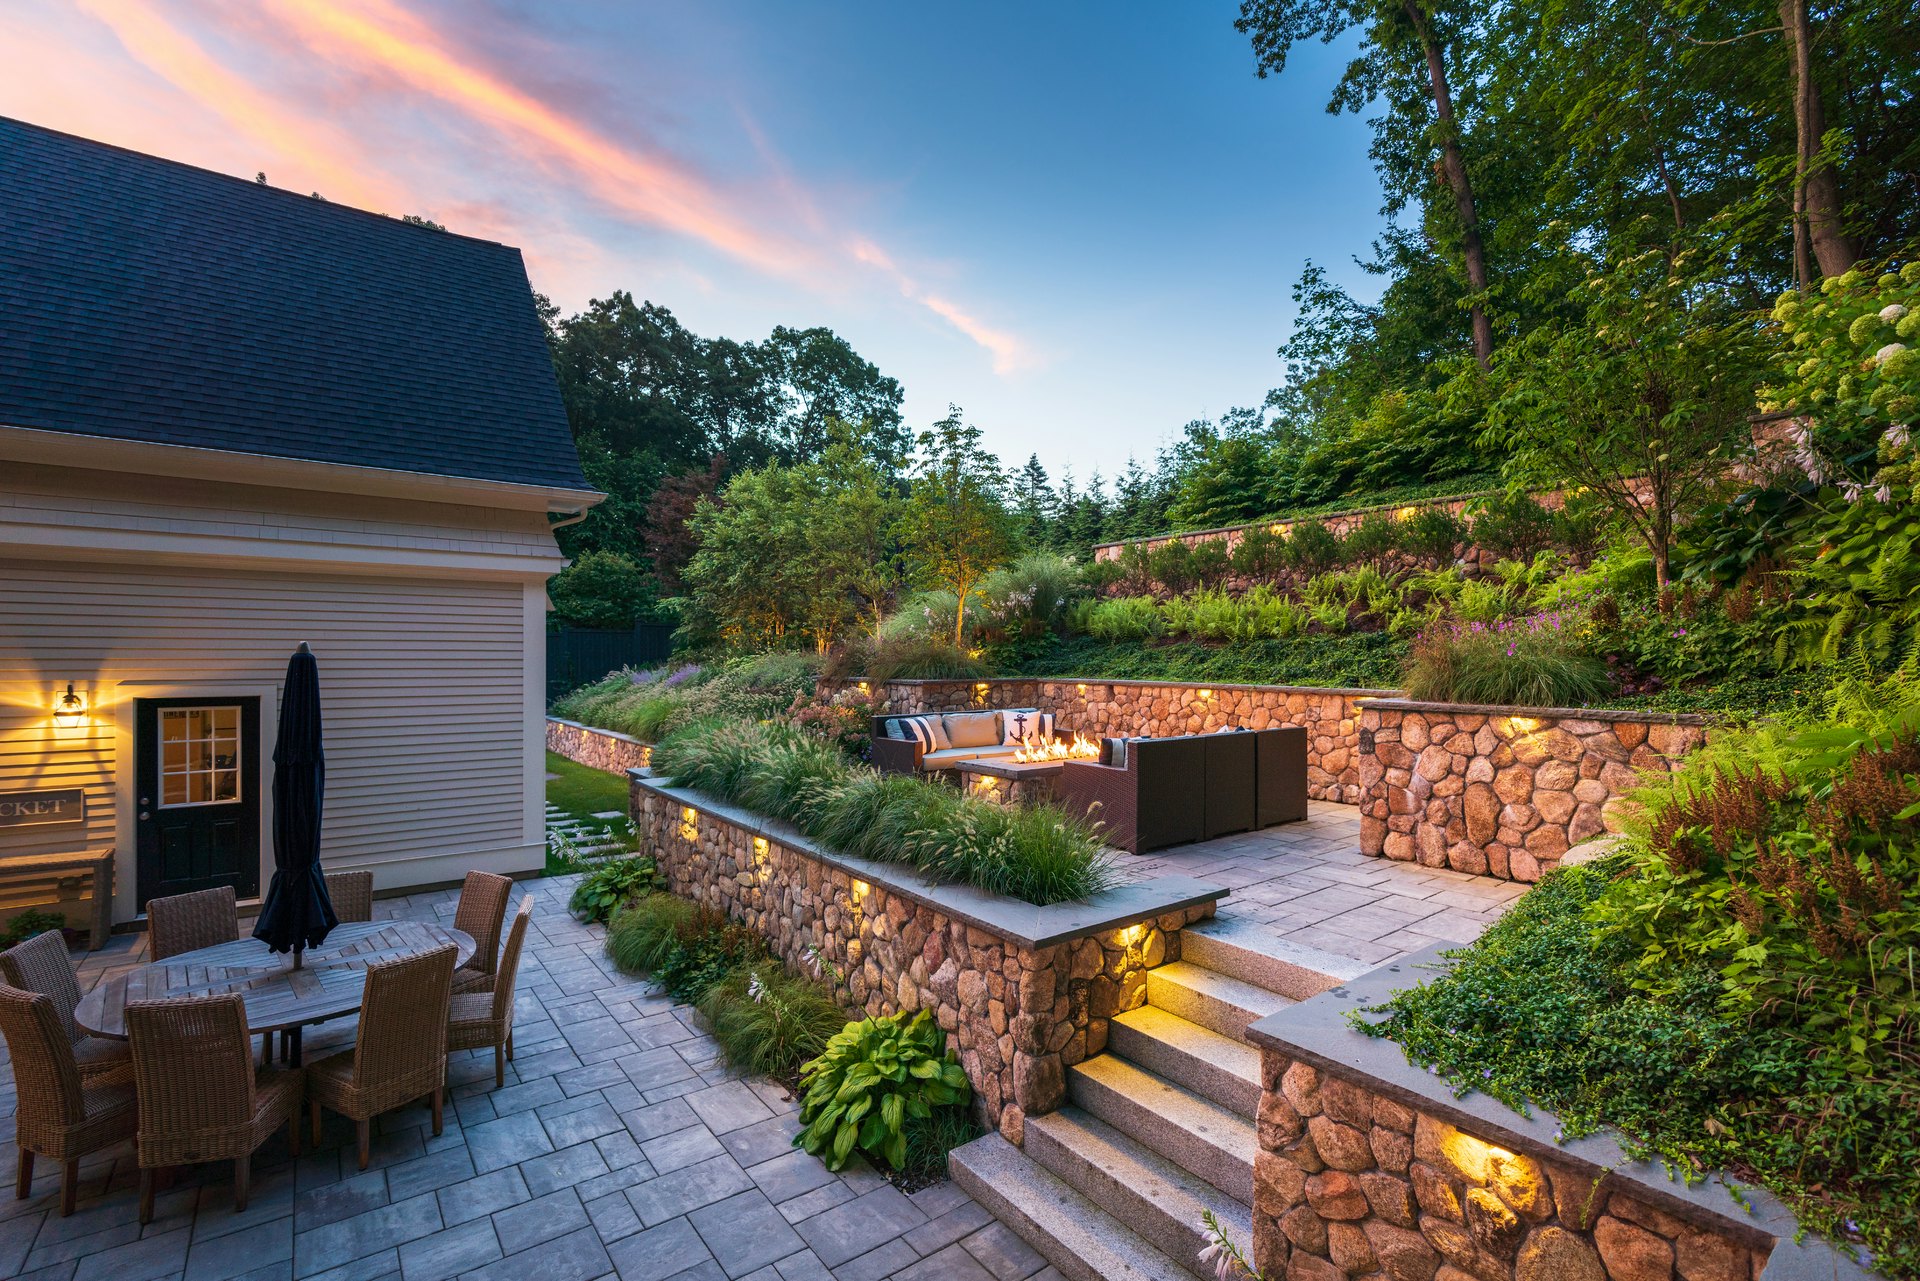 Multilevel terraced patios provided Lynch Landscape & Tree Service plenty of space to feature lush greenery and create usable entertainment space.